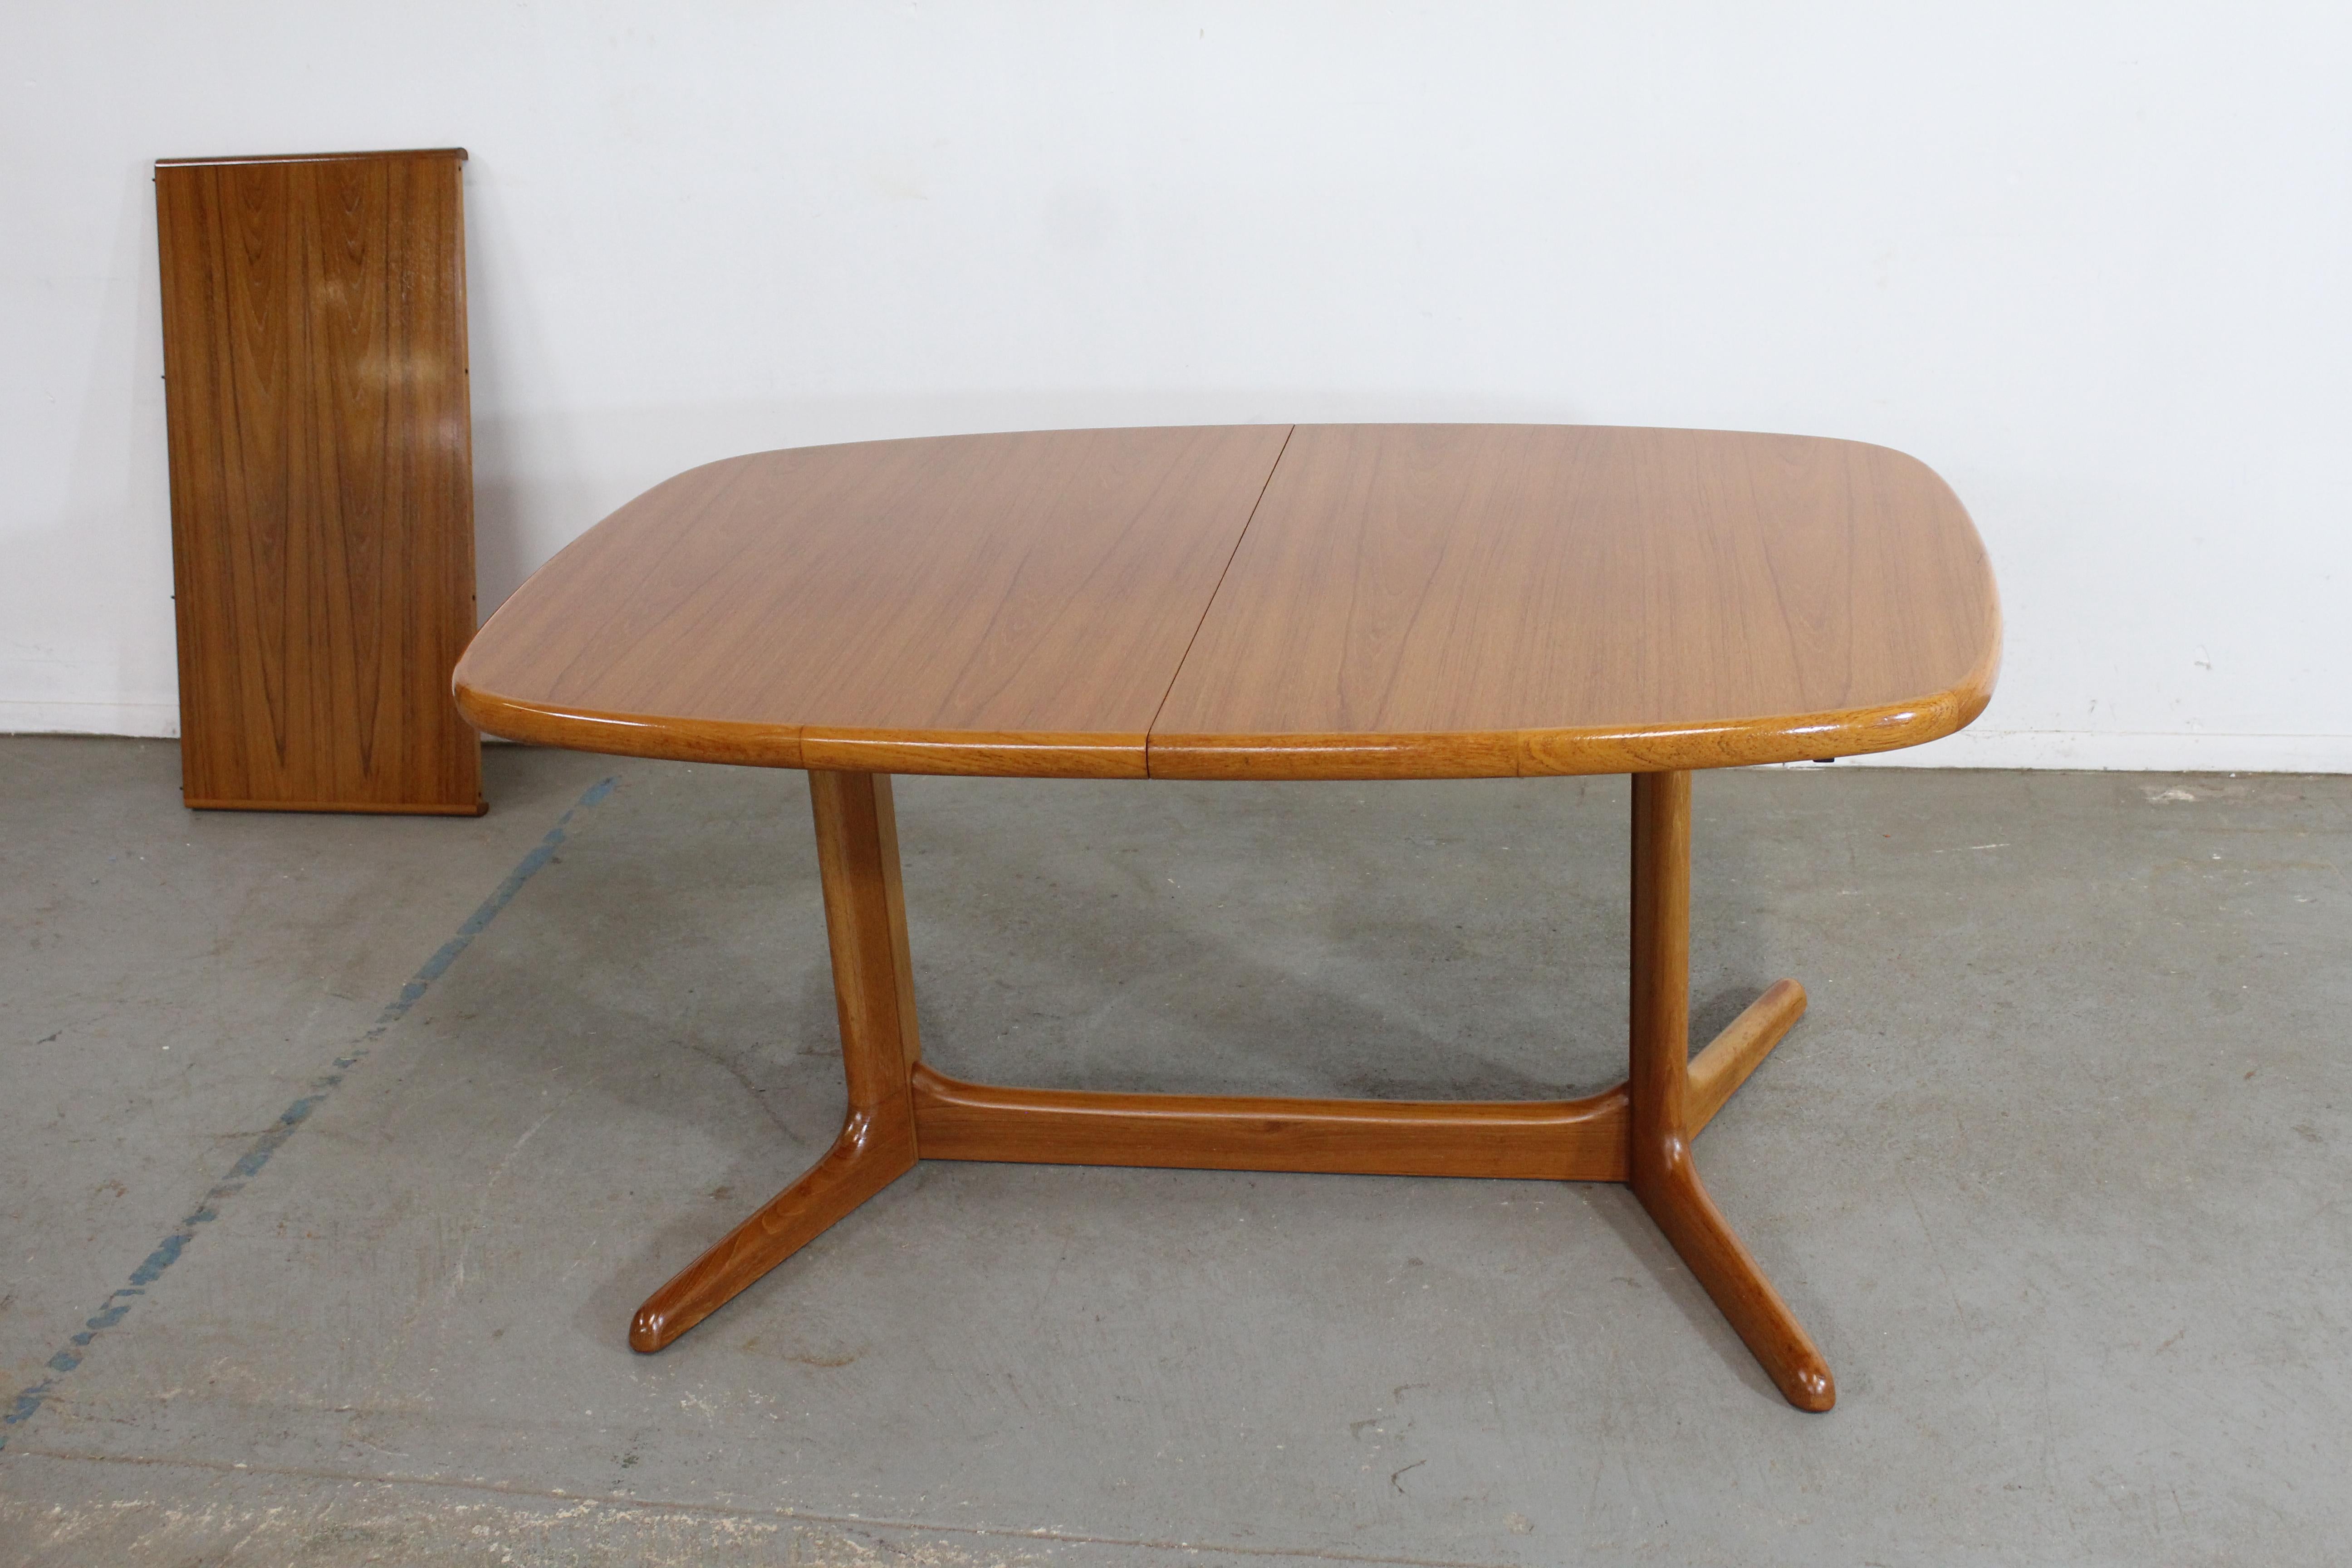 Mid-Century Danish Modern extendable surfboard dining table

Offered is a vintage Mid-Century Modern dining table. The table is made of teak and has 1 20